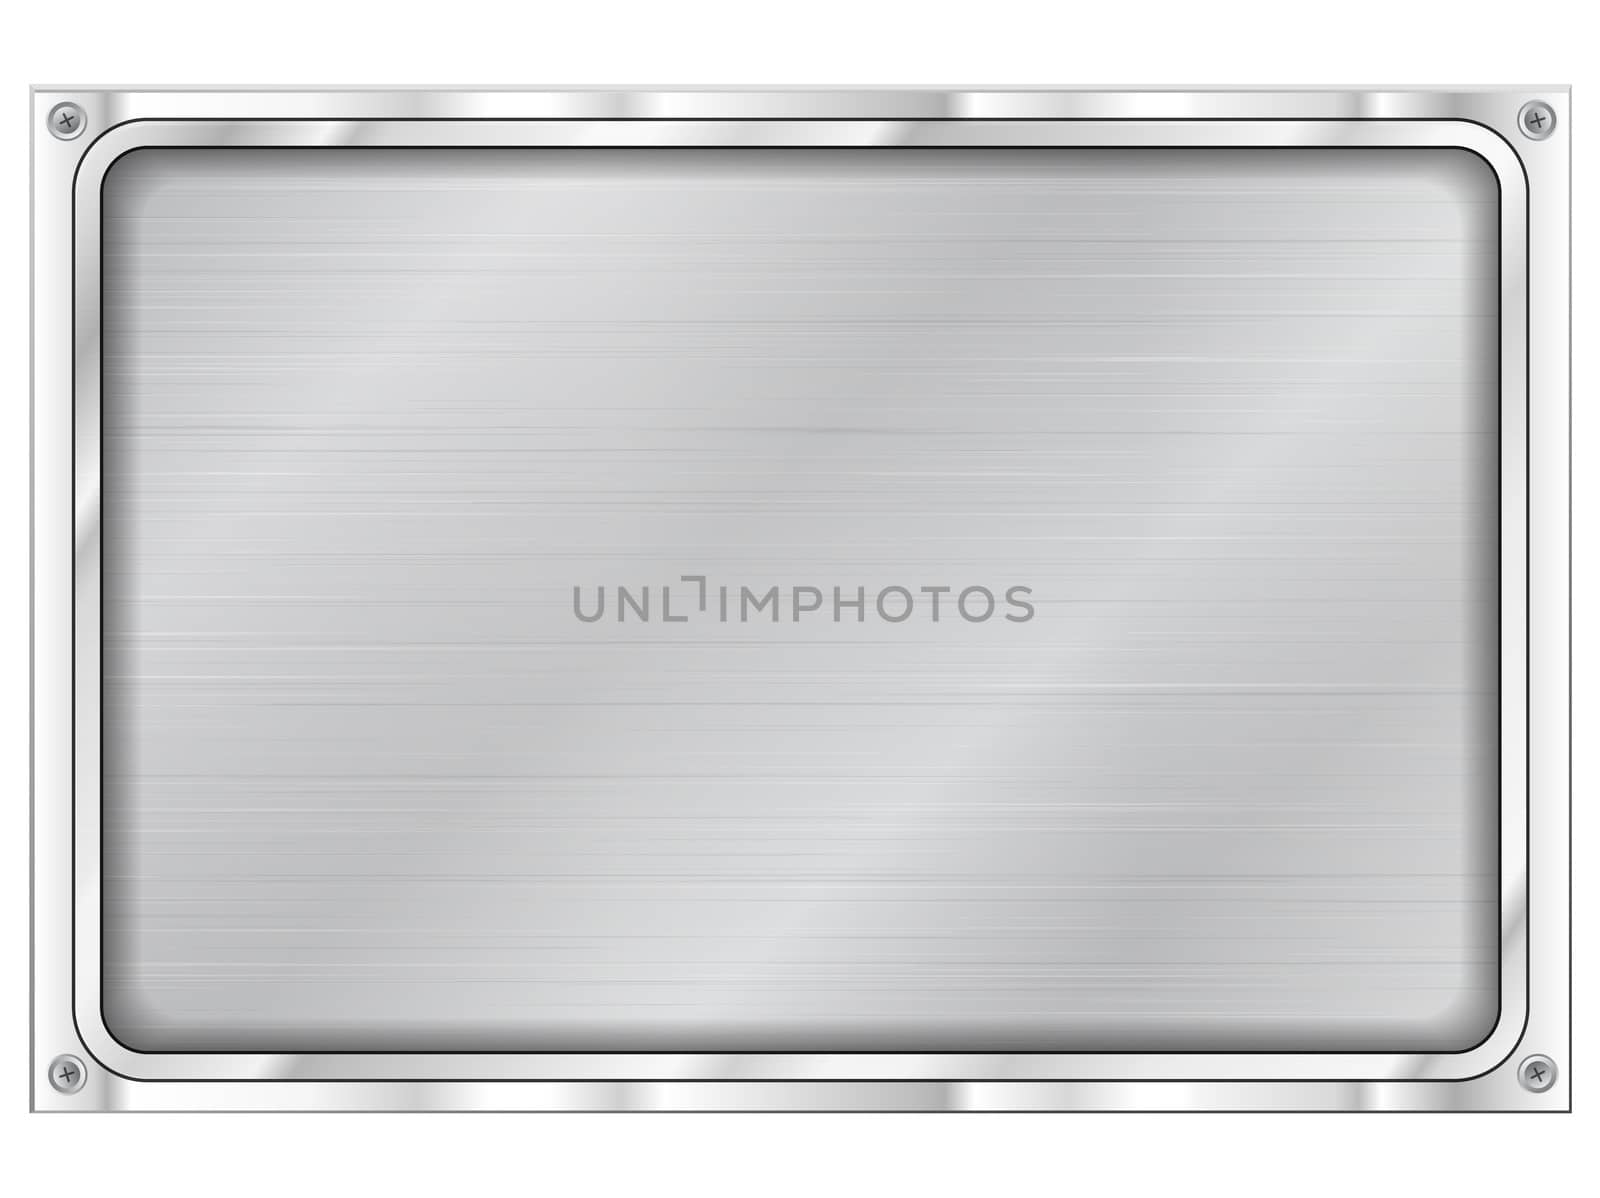 Illustration of realistic metal plate on white background